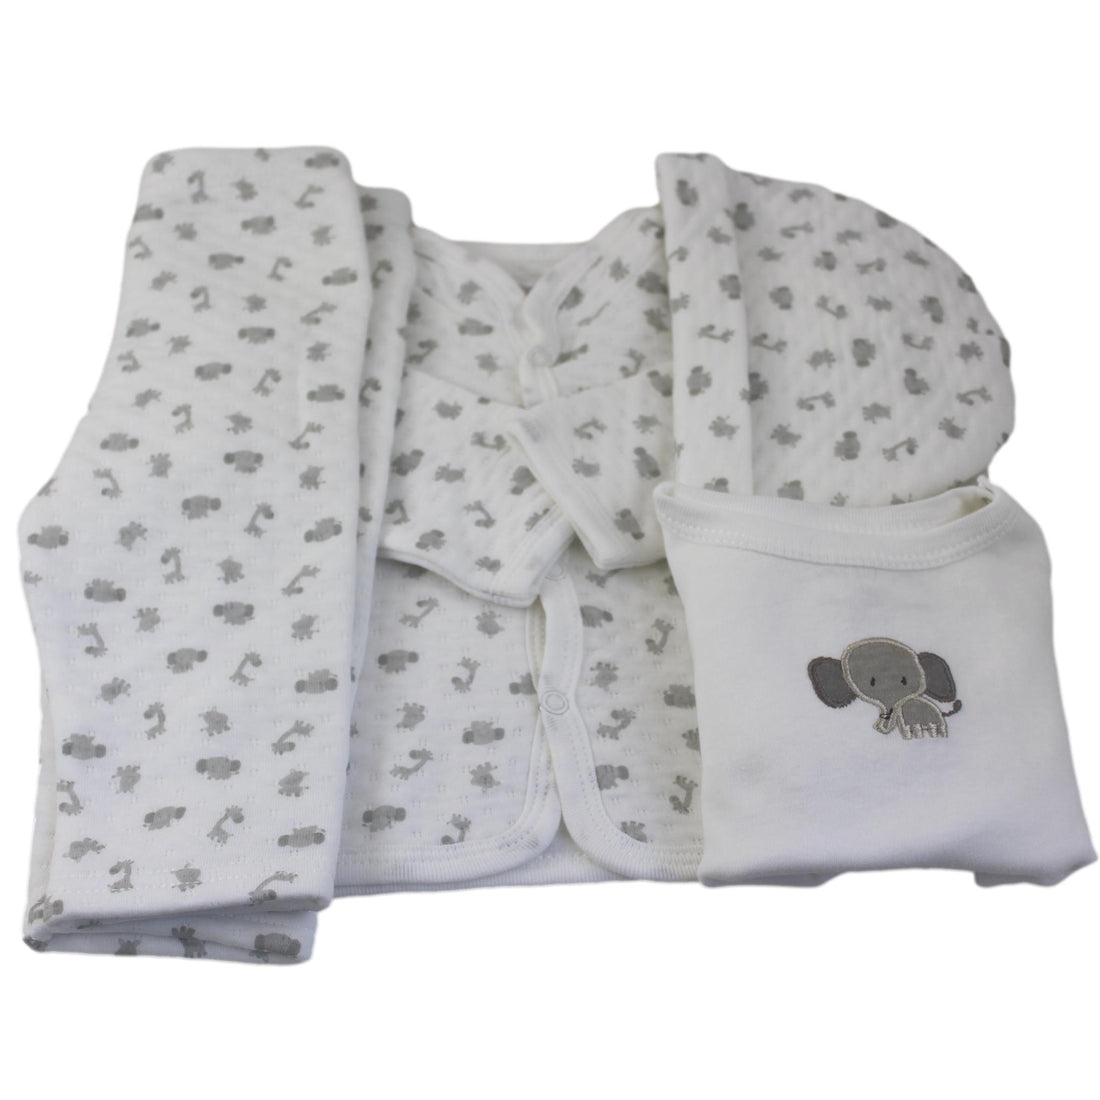 4 Piece Elephant Themed Baby Clothes Set